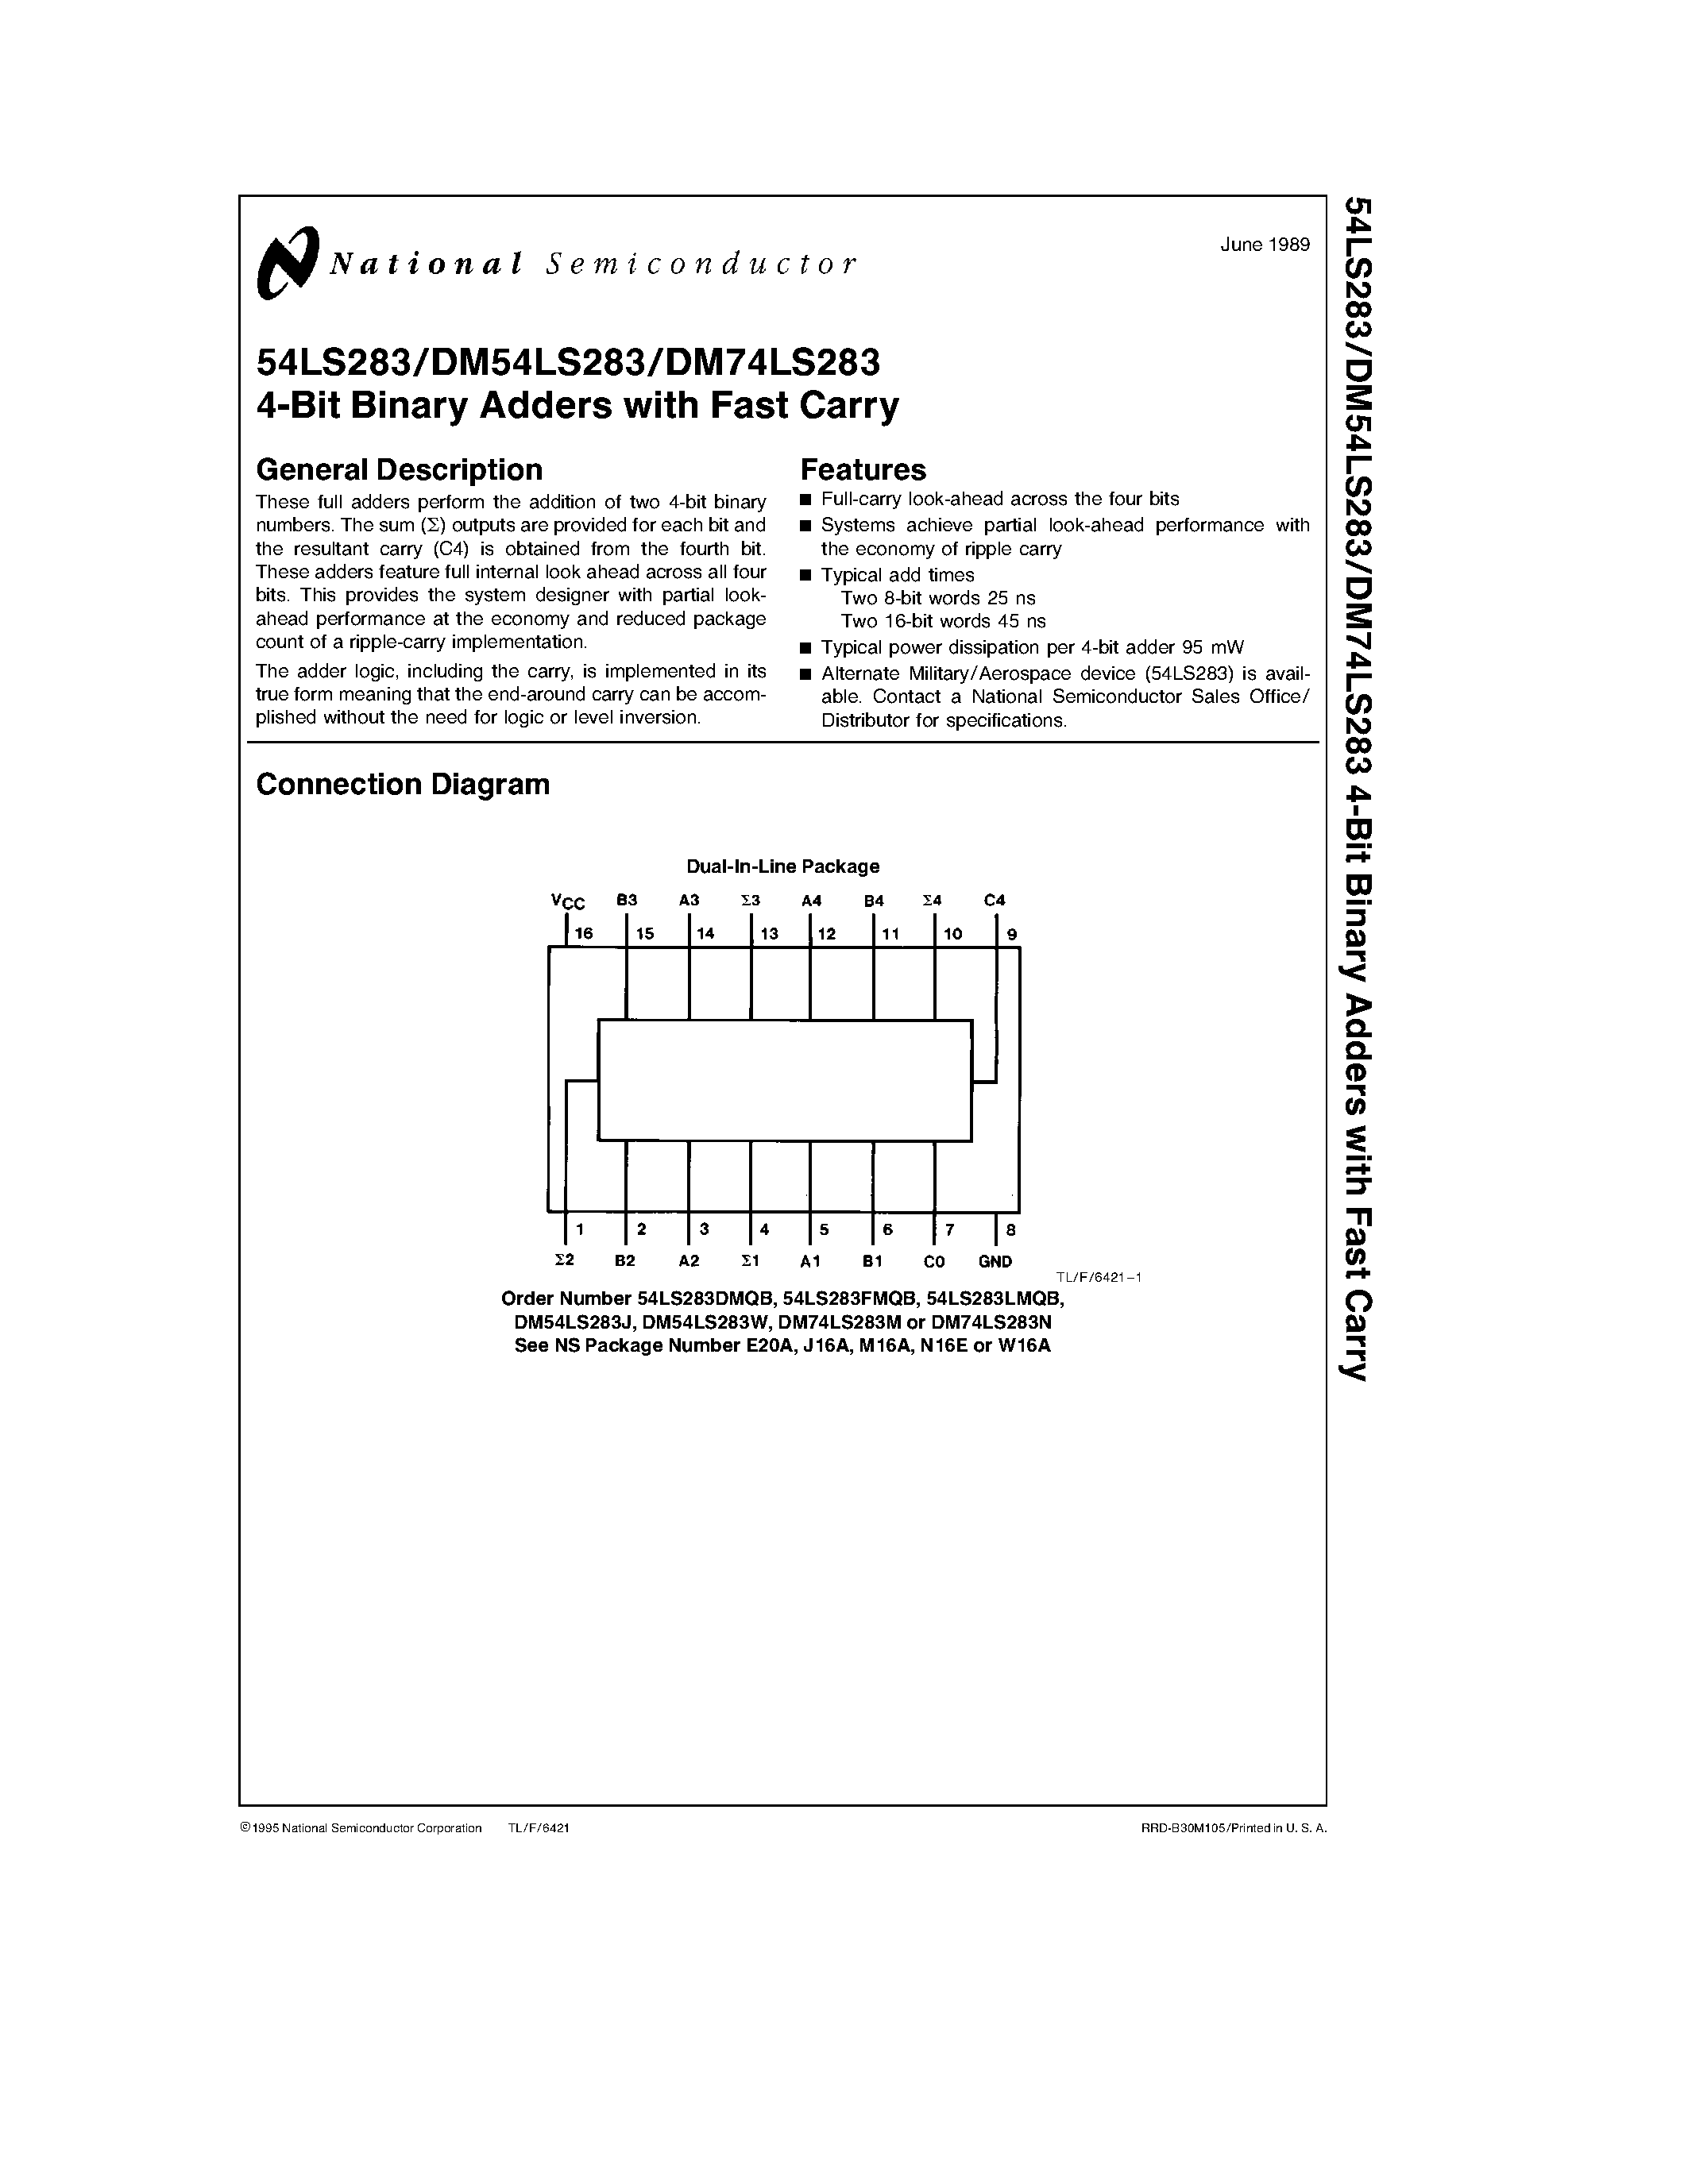 Datasheet 74283 - 4-Bit Binary Adders with Fast Carry page 1